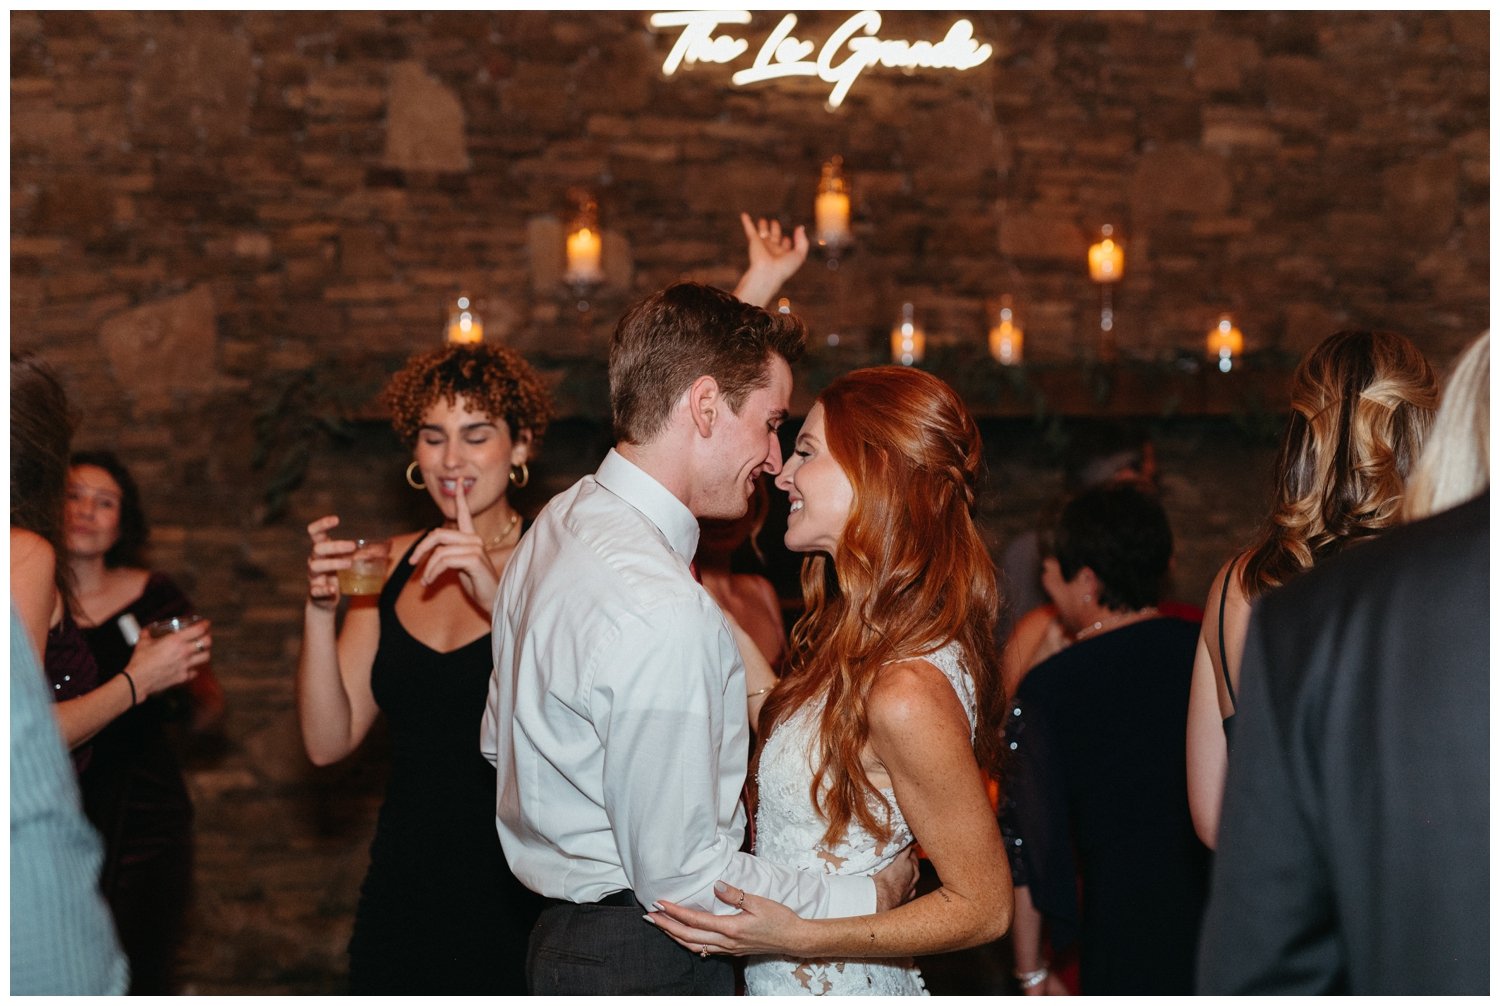 A slow dance at the mountain wedding venue